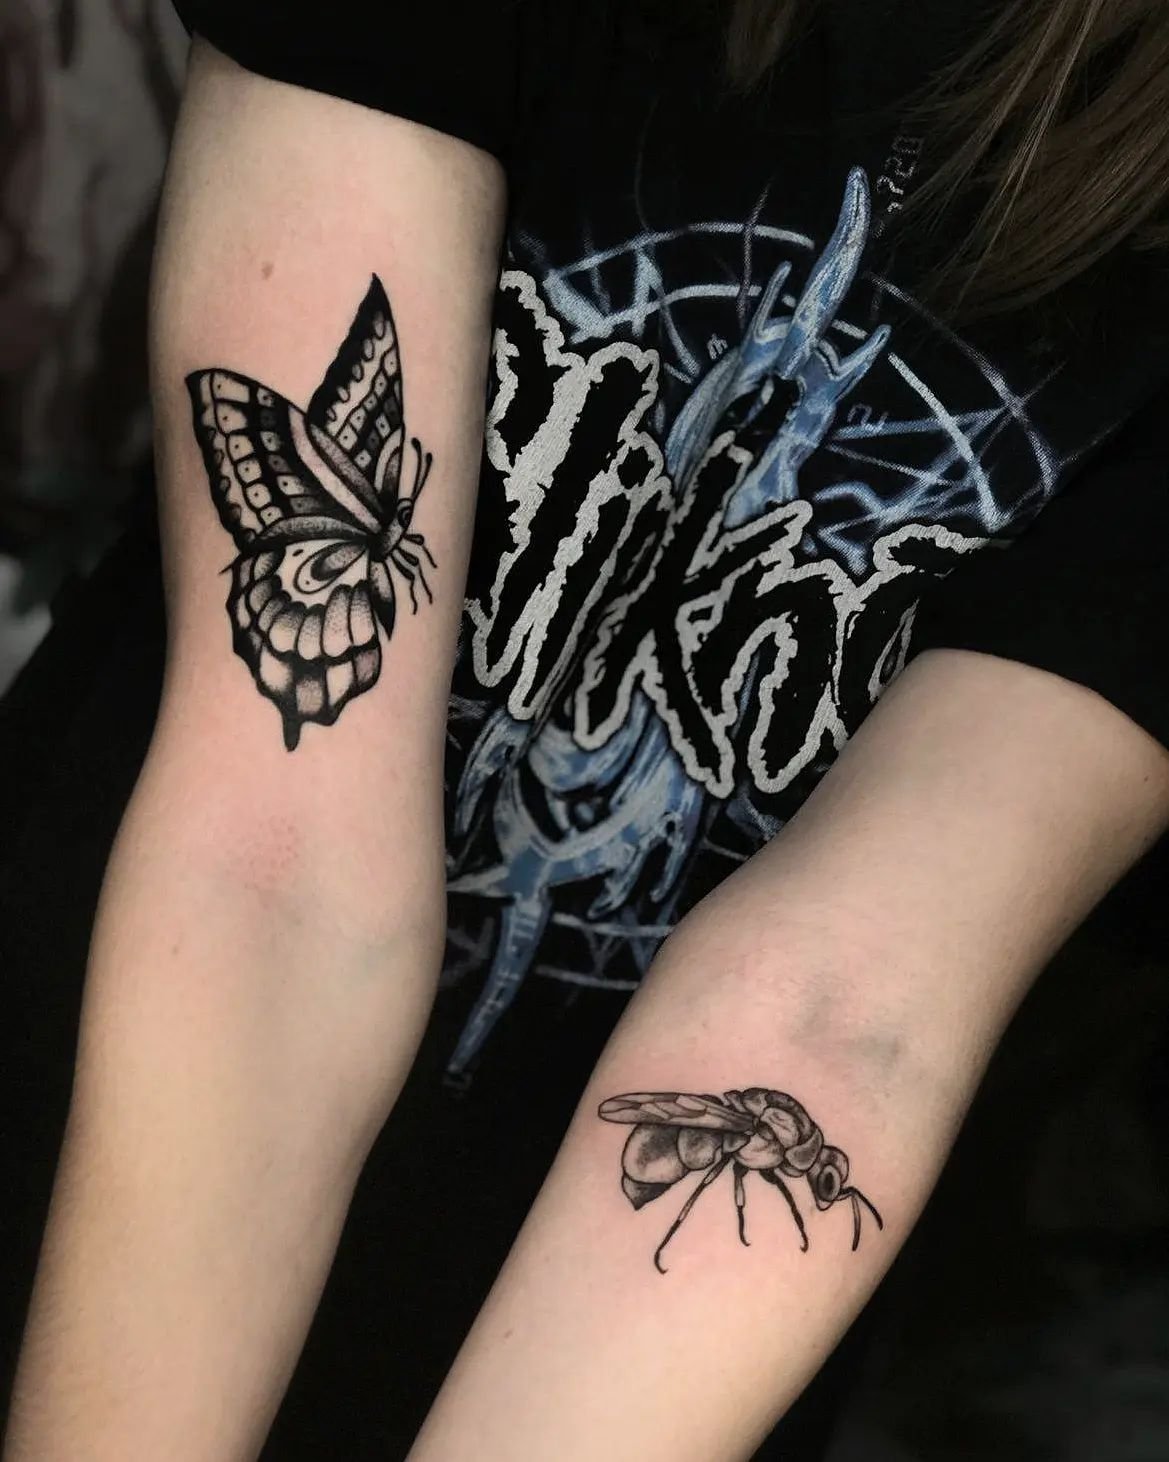 Two cute insects for lovely Kate, who was so brave and got tattooed by @mikeysharks and me at the same time at our recent 10th bday flash day! Thank you so much Kate, you're the best! And thanks Mikey for calming my nerves!! 🩷🩷🦋🐝
.
.
.
.
.
#butte